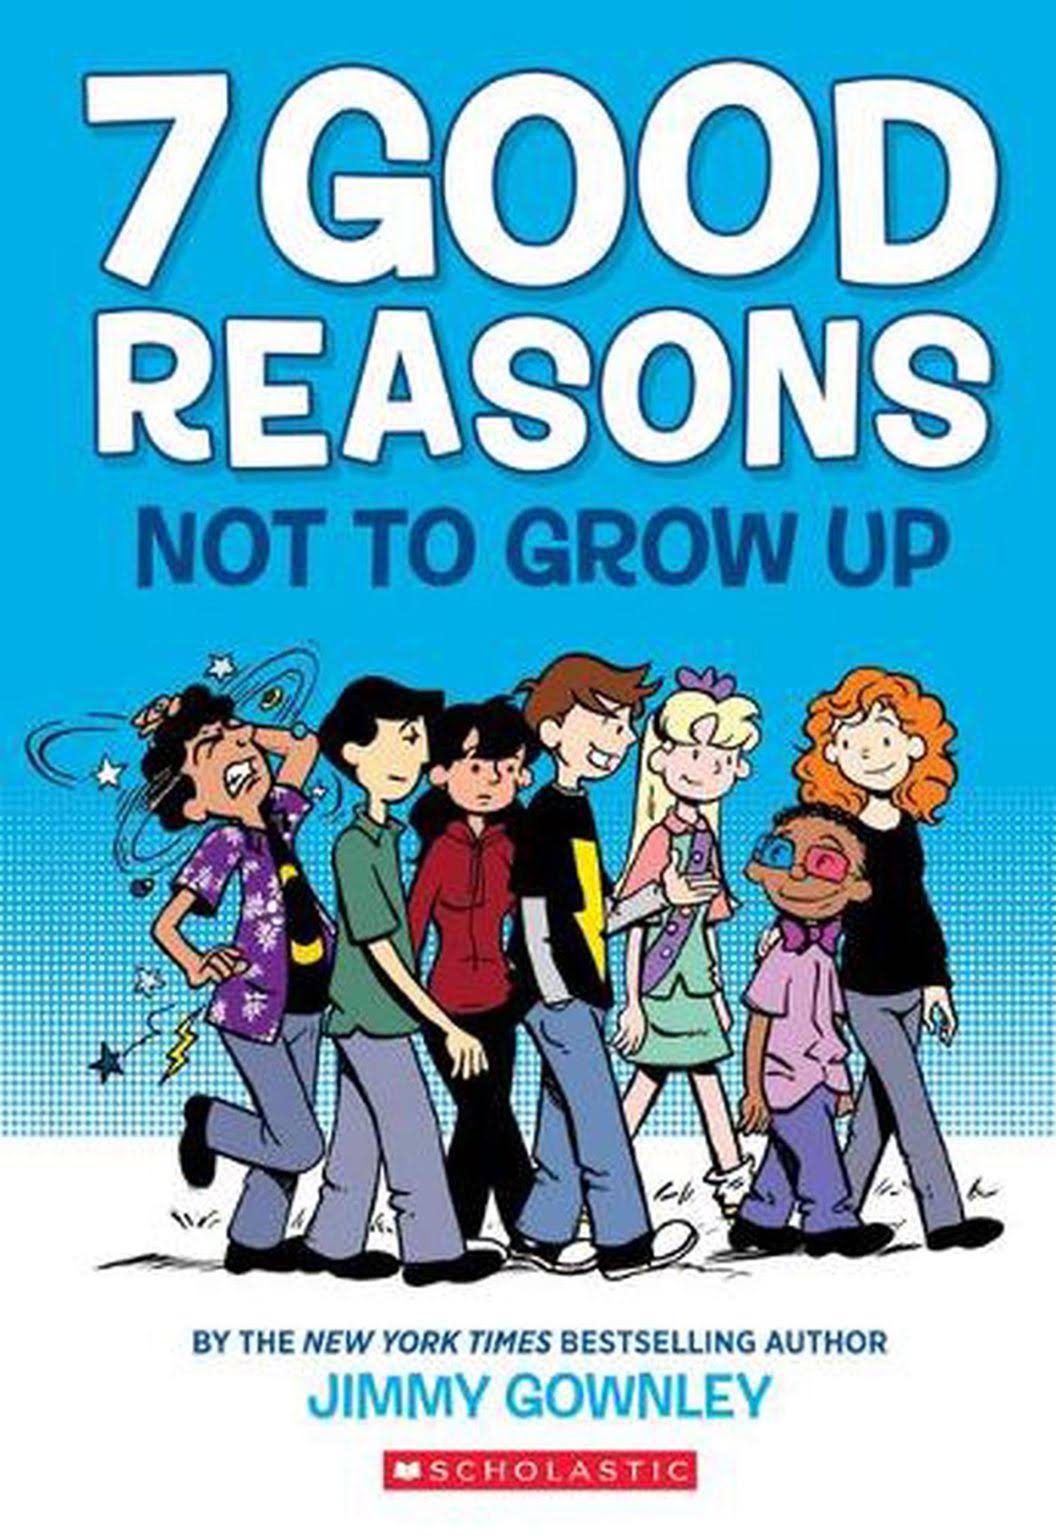 7 Good Reasons Not to Grow Up: A Graphic Novel by Jimmy Gownley